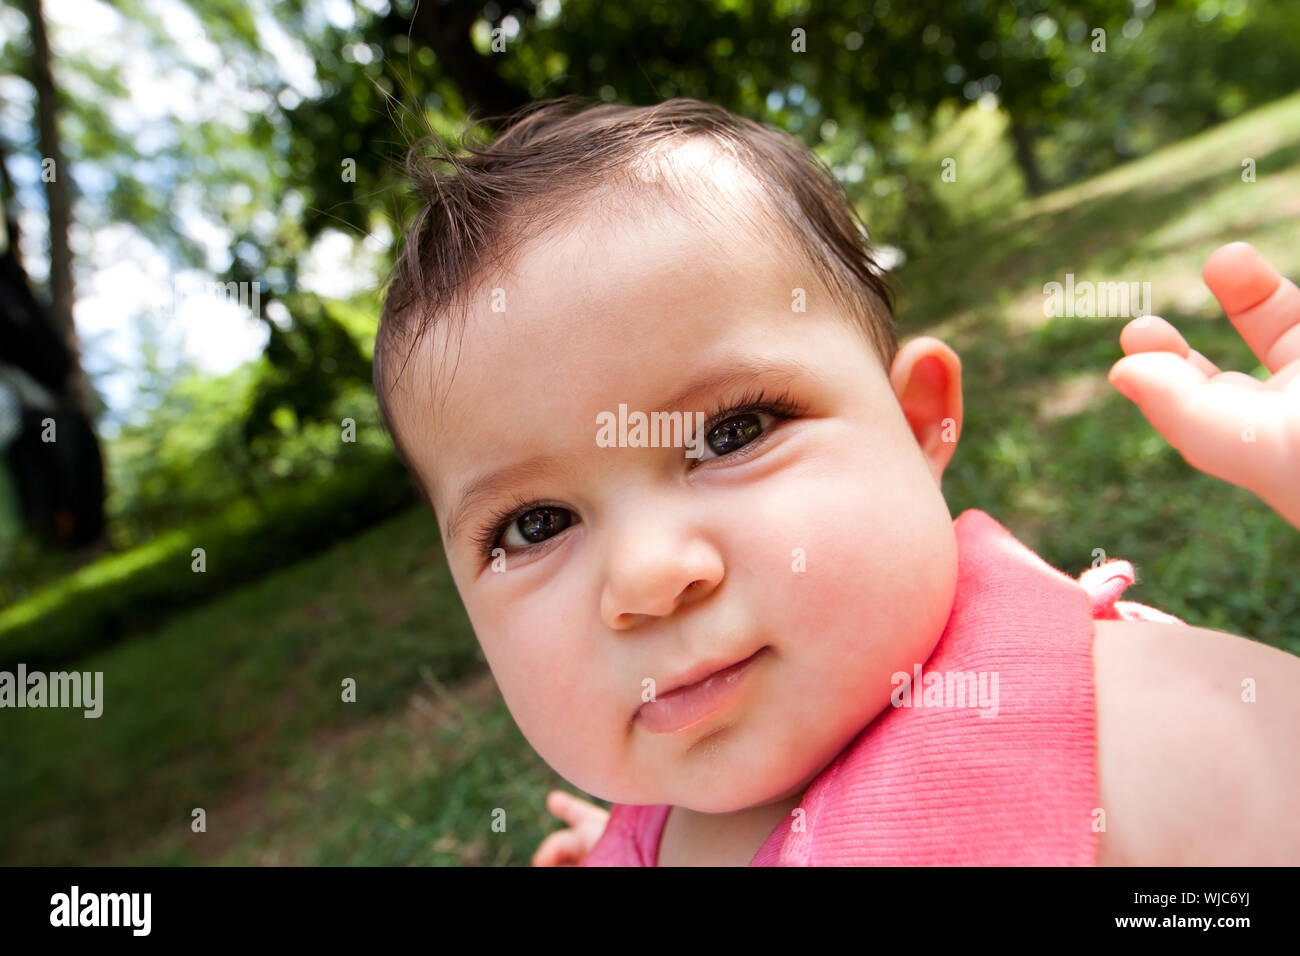 Caricature cute funny distorted baby face with big chubby cheeks of a Caucasian Hispanic infant girl with glossy eyes, in a park. Stock Photo